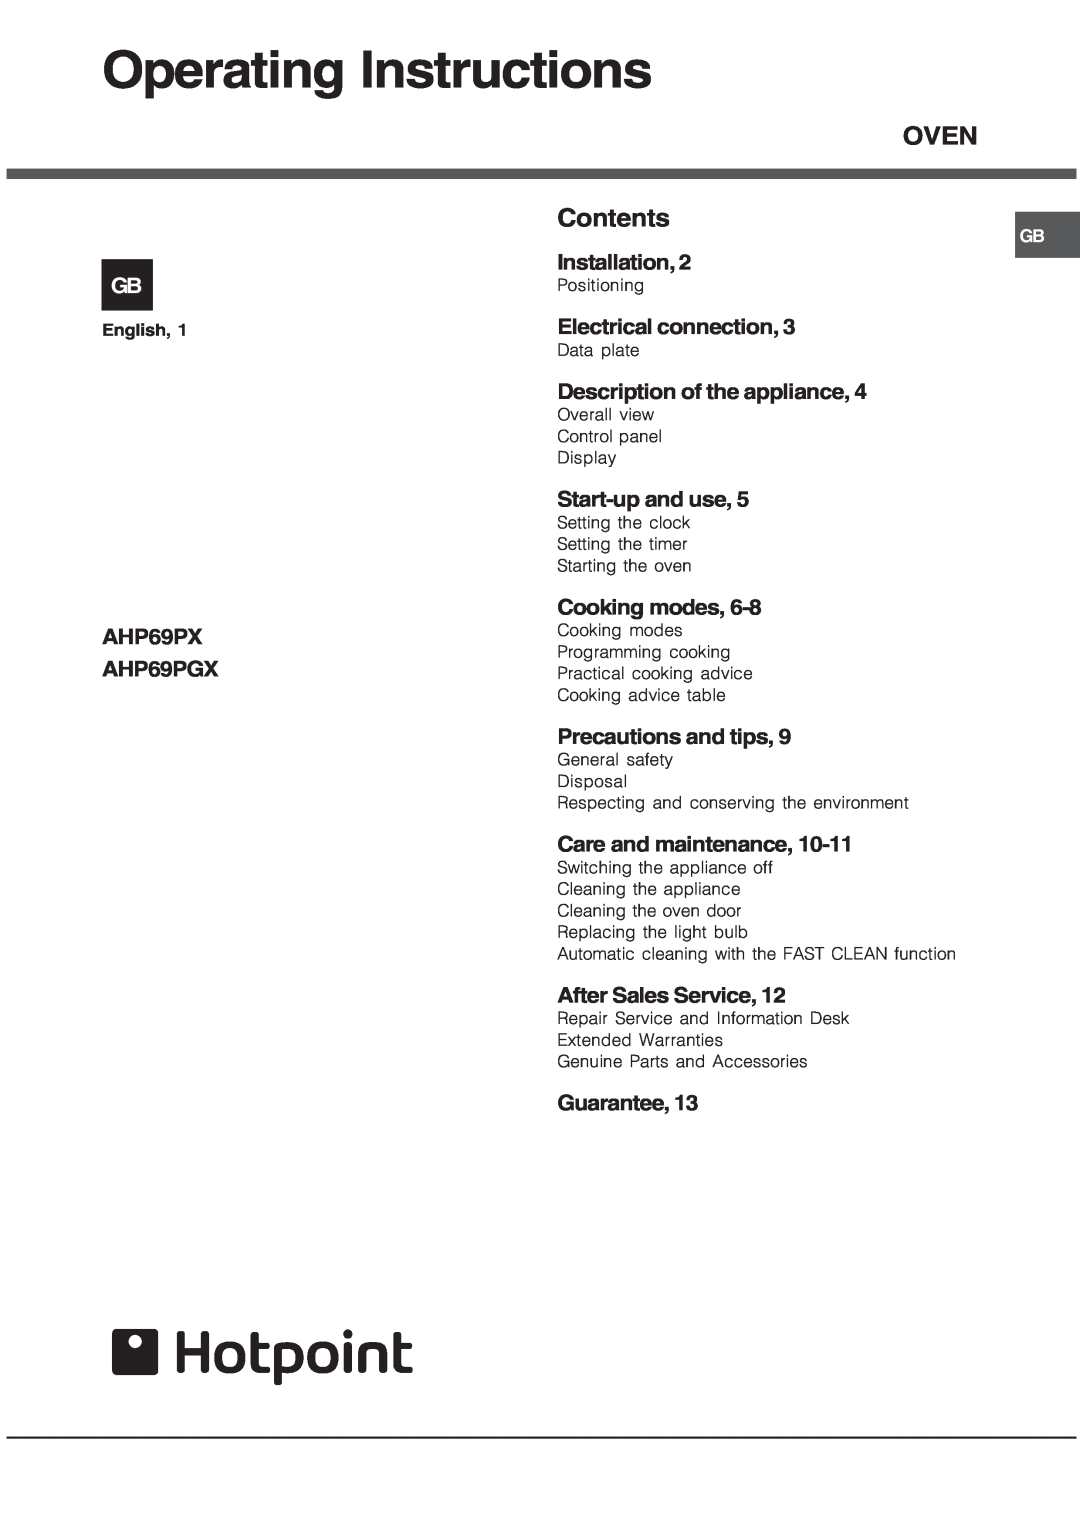 Hotpoint AHP69PGX manual Operating Instructions, OVEN Contents 